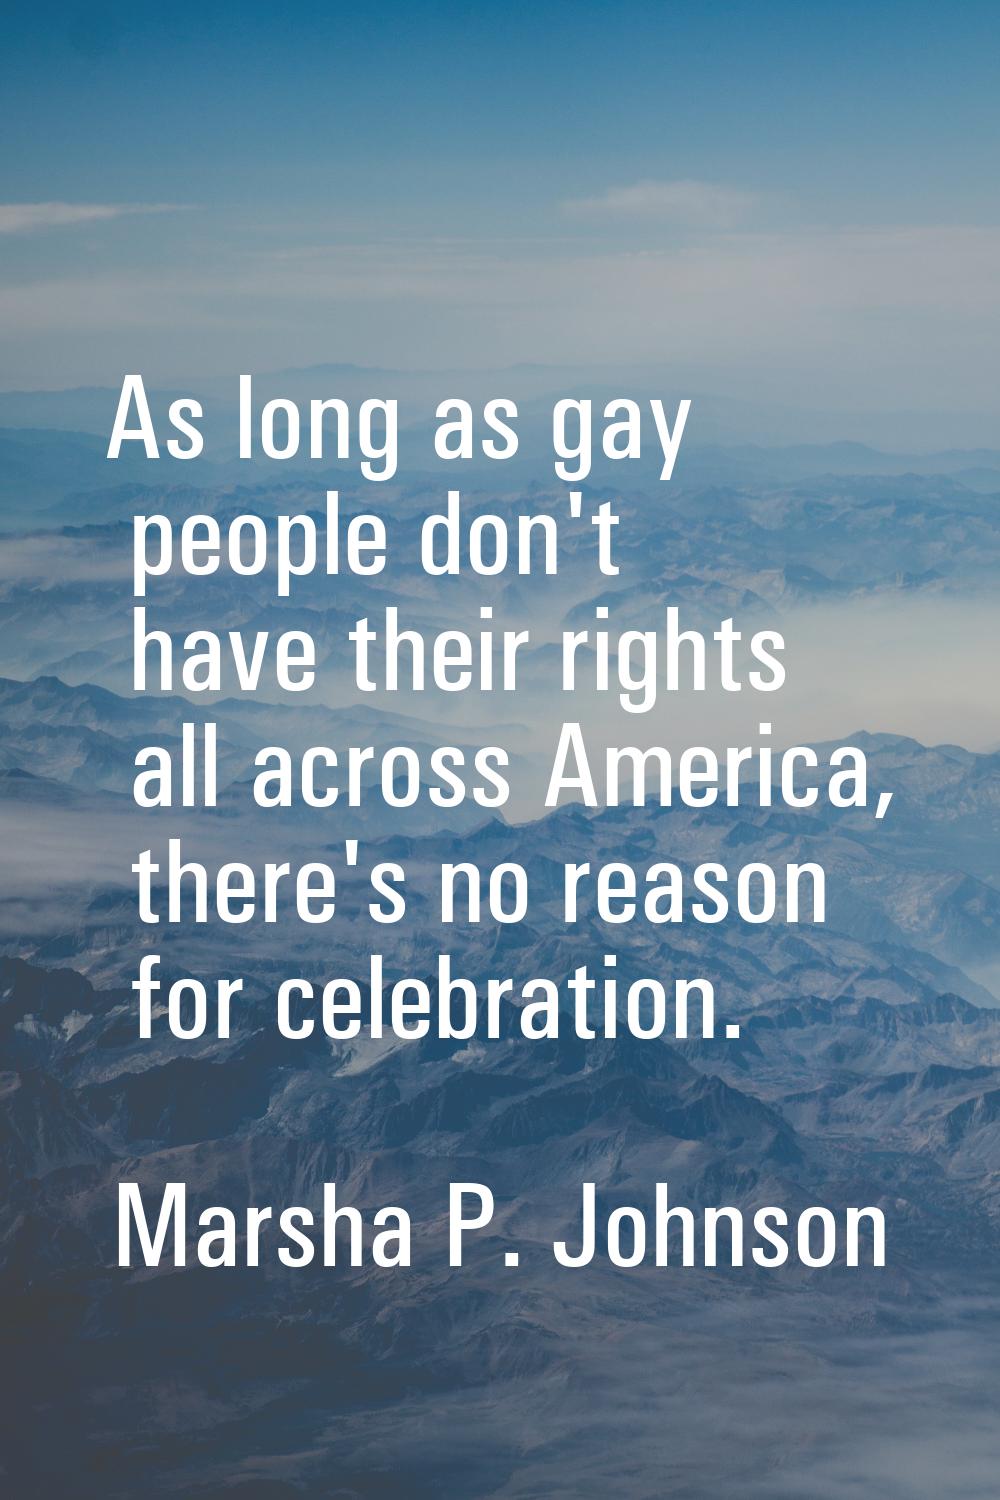 As long as gay people don't have their rights all across America, there's no reason for celebration